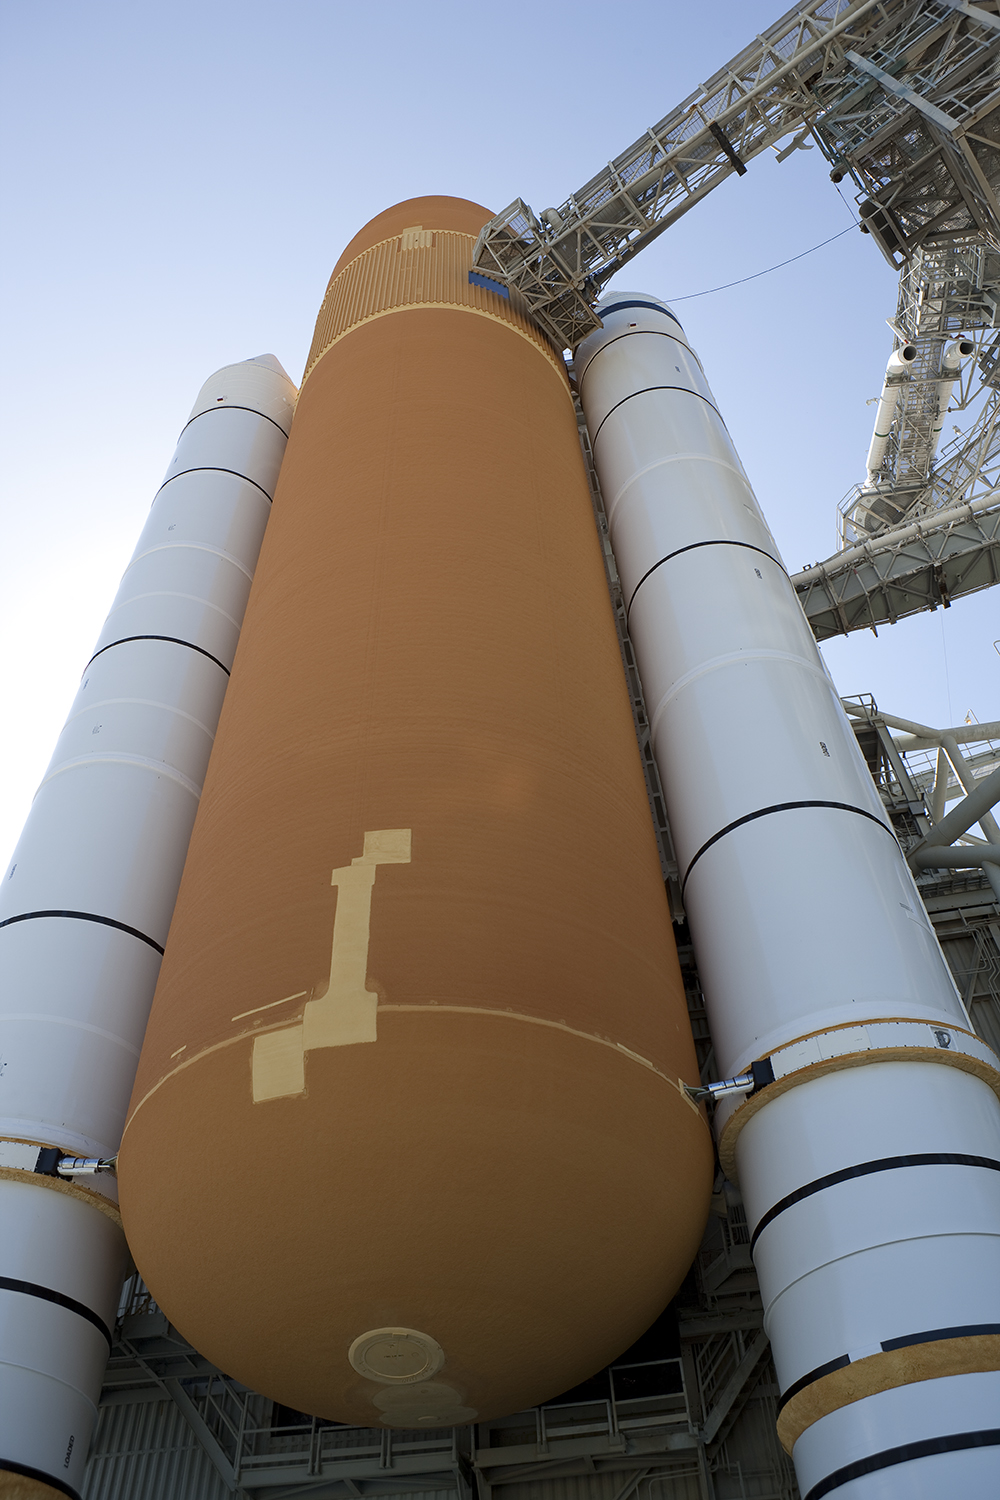 External Tank and Solid Rocket Boosters